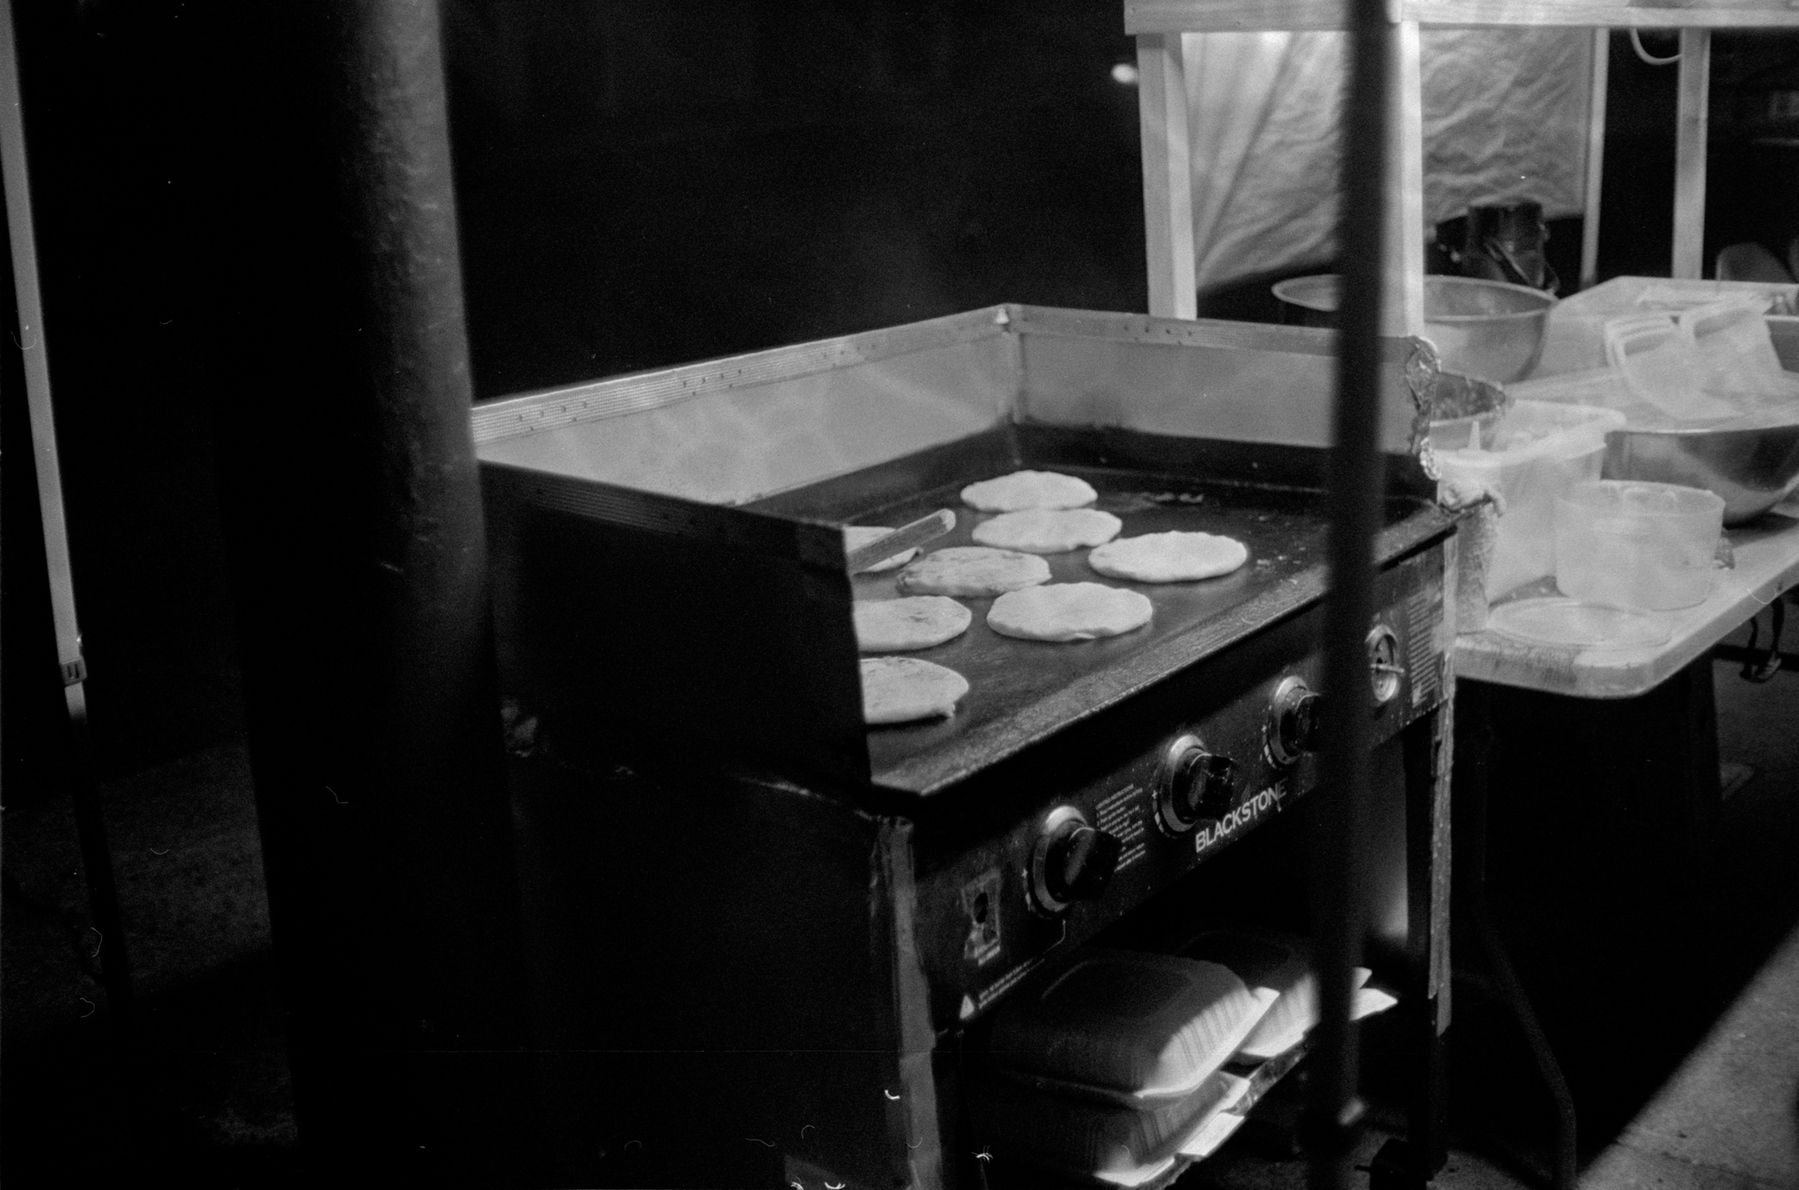 a scan of a black and white photo showing a few pupusas being cooked on a flat grill